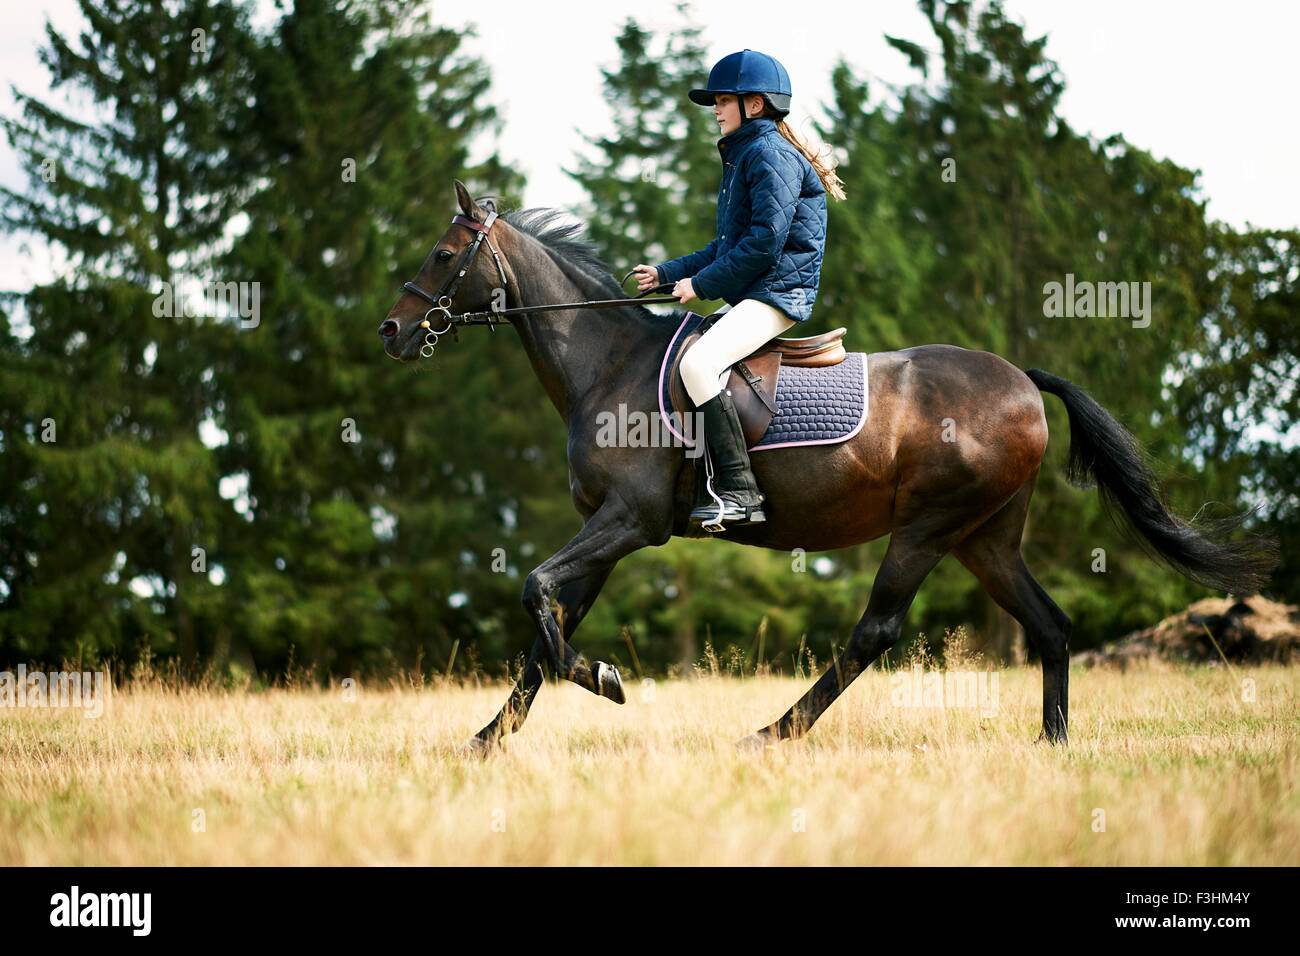 Girl riding horse in field Stock Photo